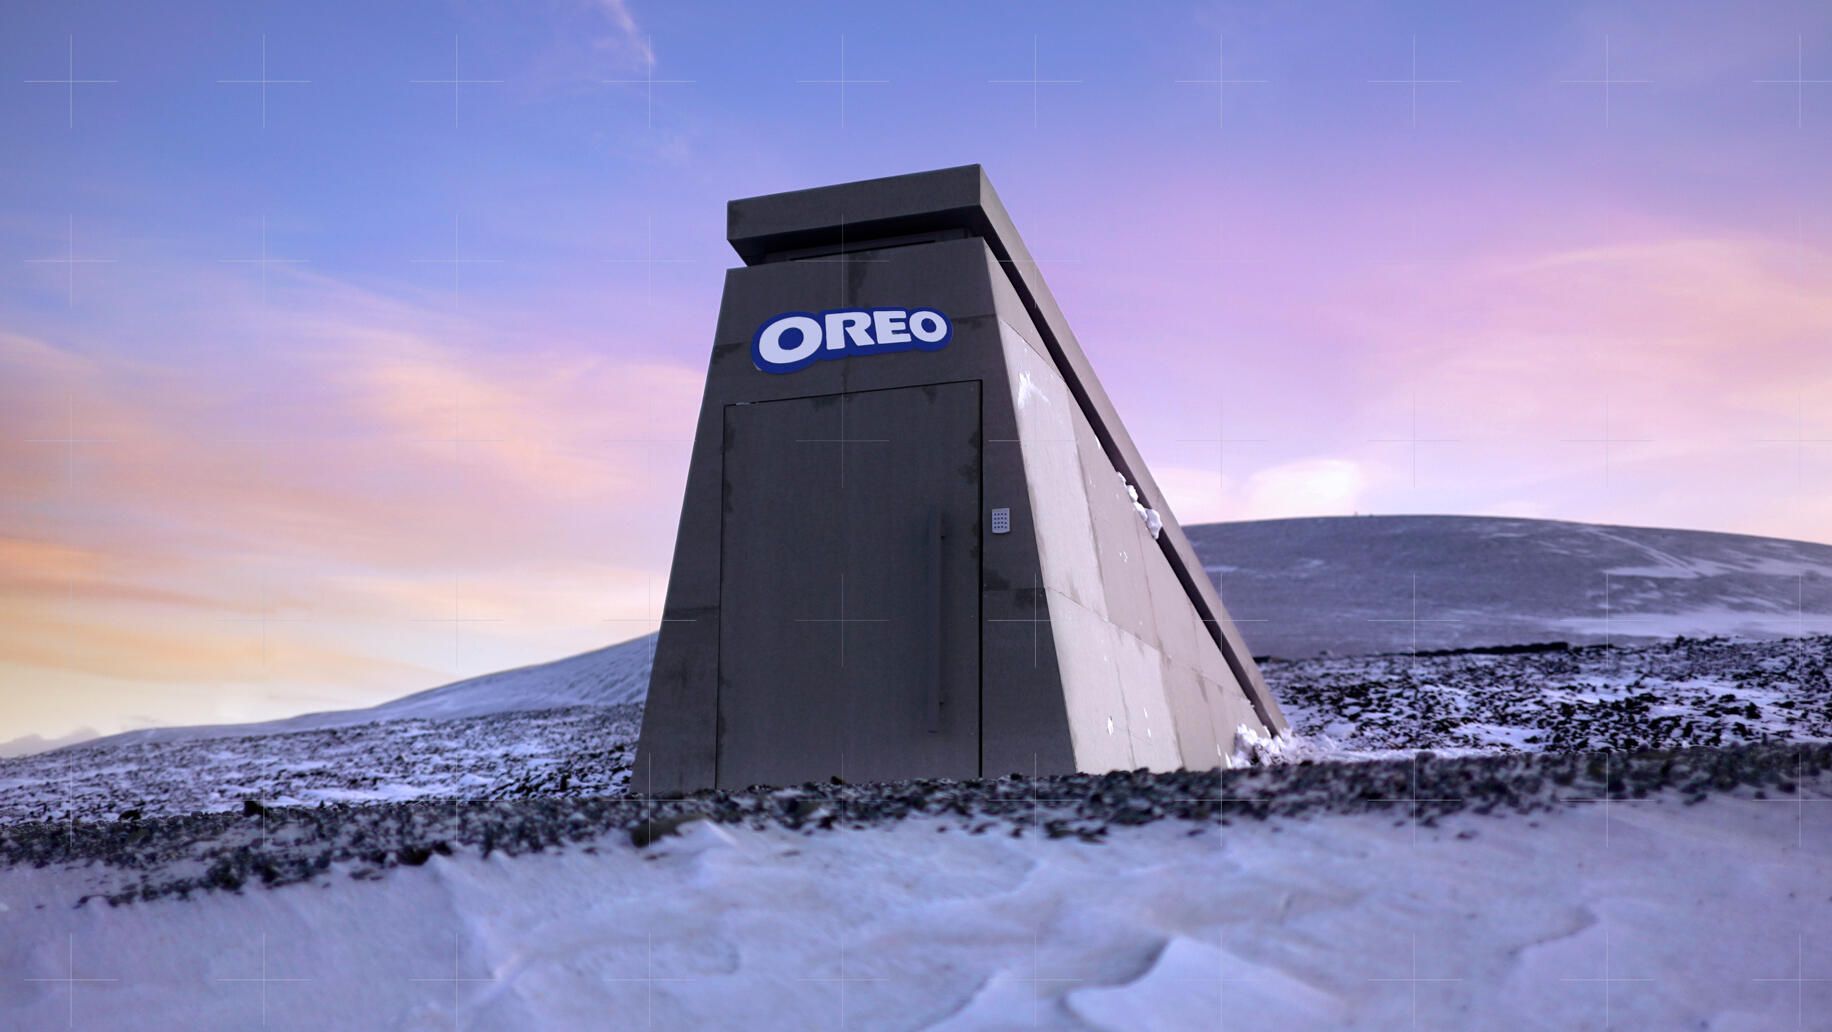 the asteroid bunker made by Oreo to hide its recipe